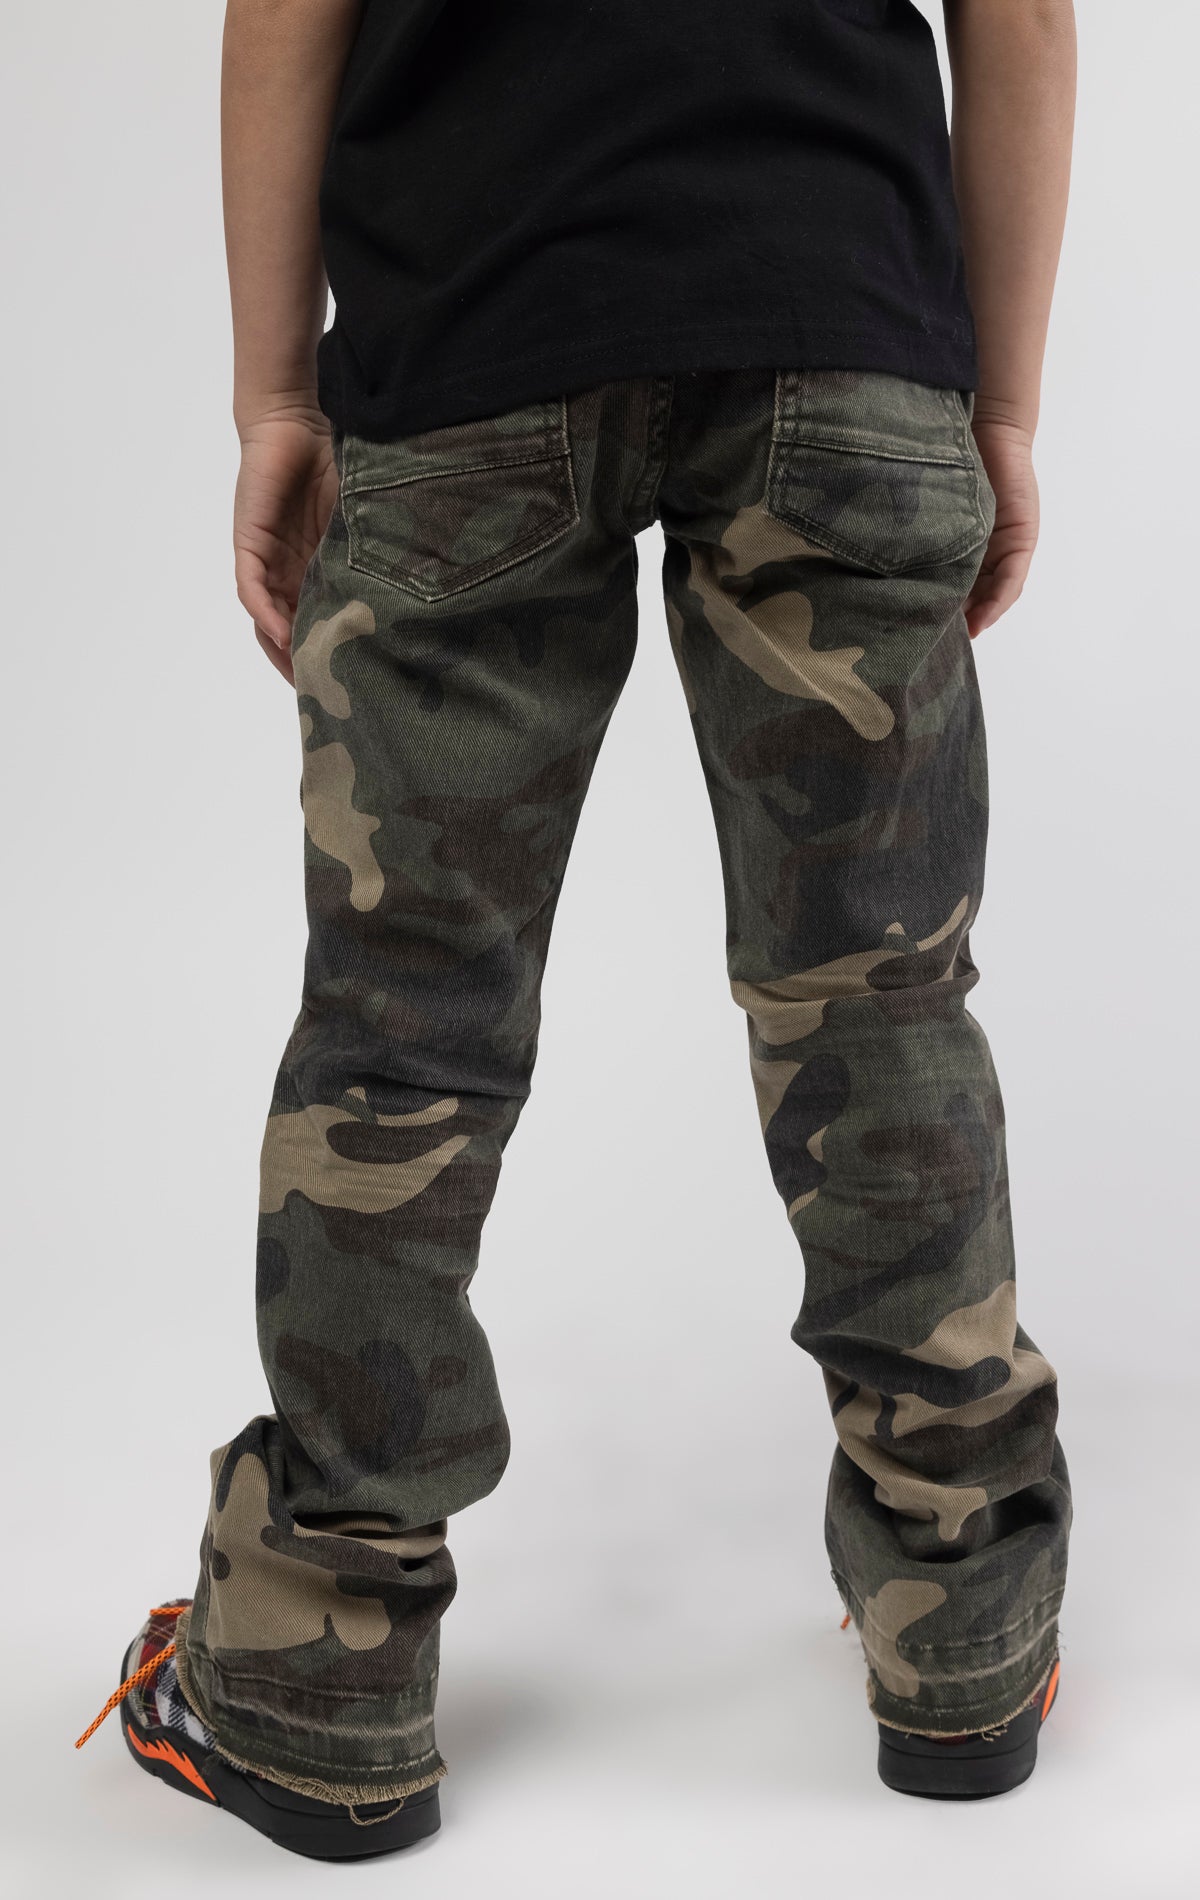 Woodland Extended length flare pants for maximum stacks.